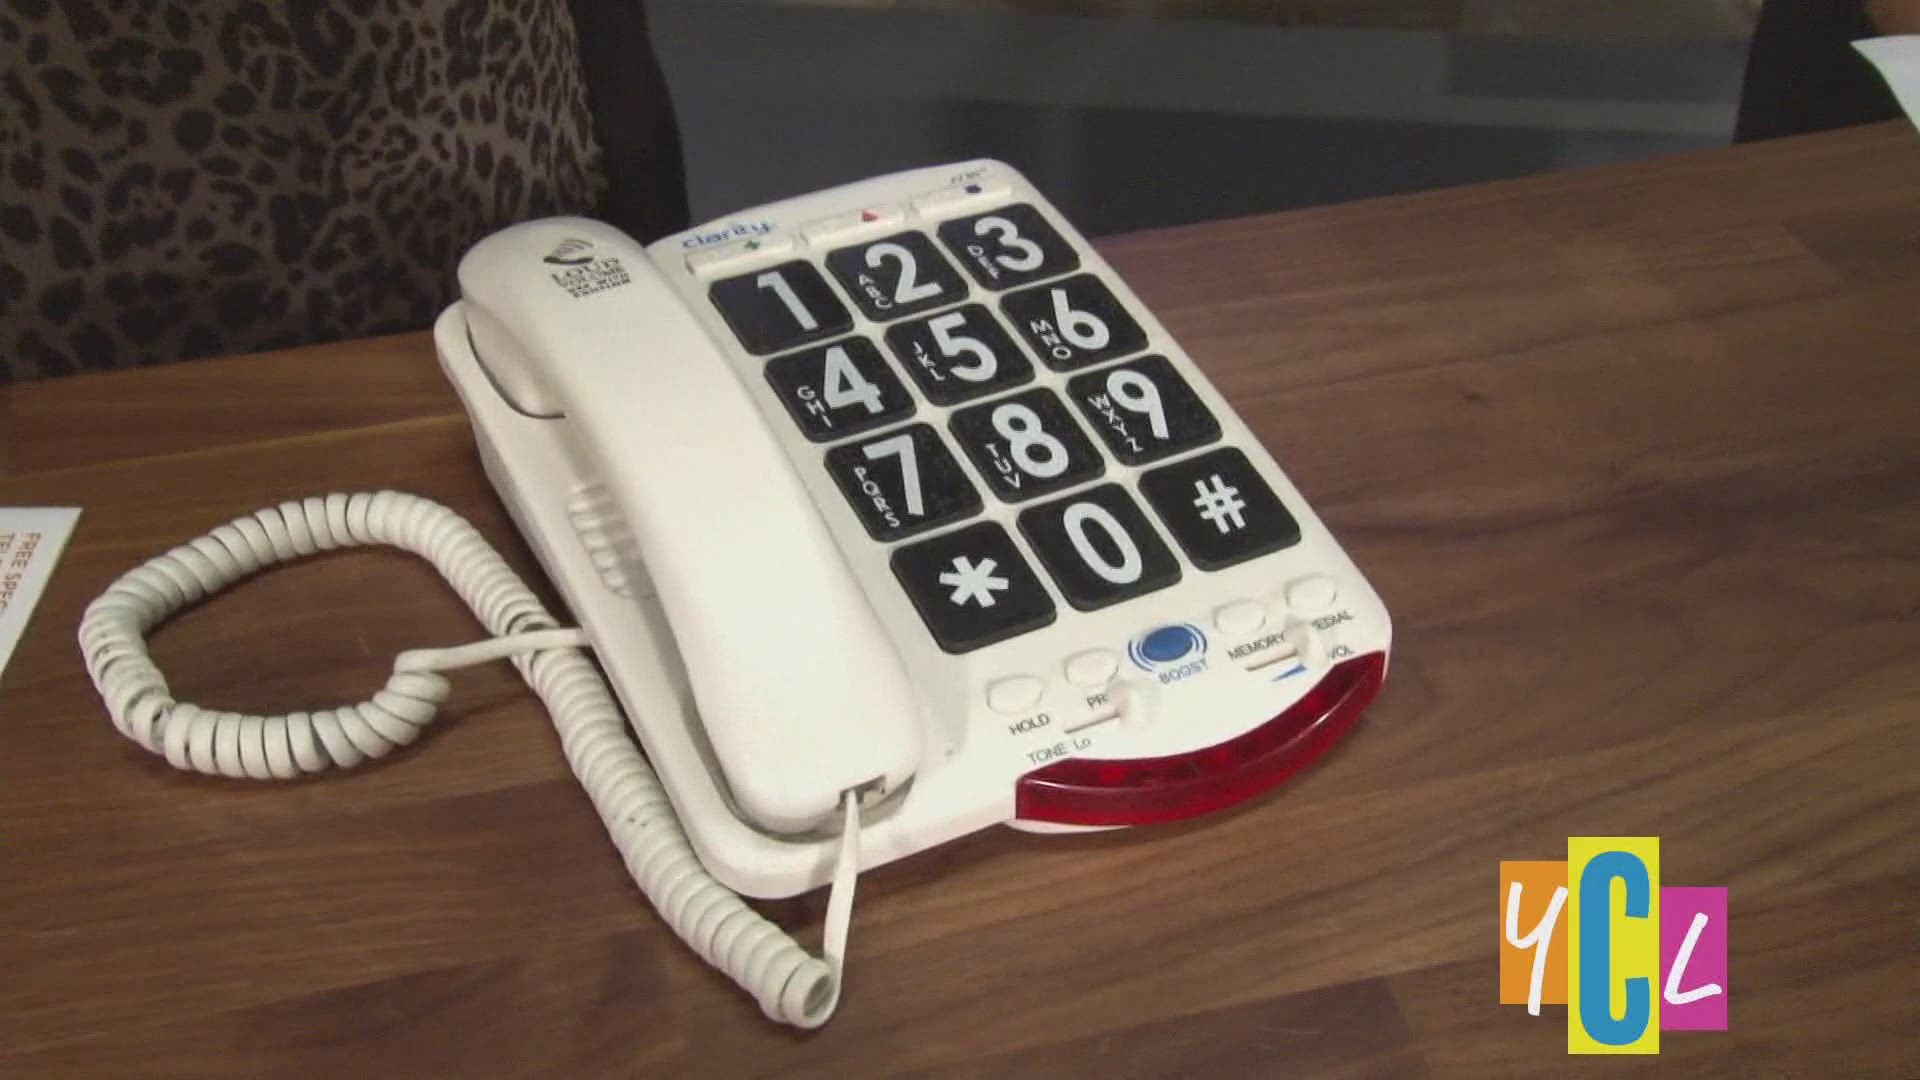 Do you or a loved one need assistance with telephones for the vision and hearing impaired? California Phones is here to keep you connected! Paid segment.